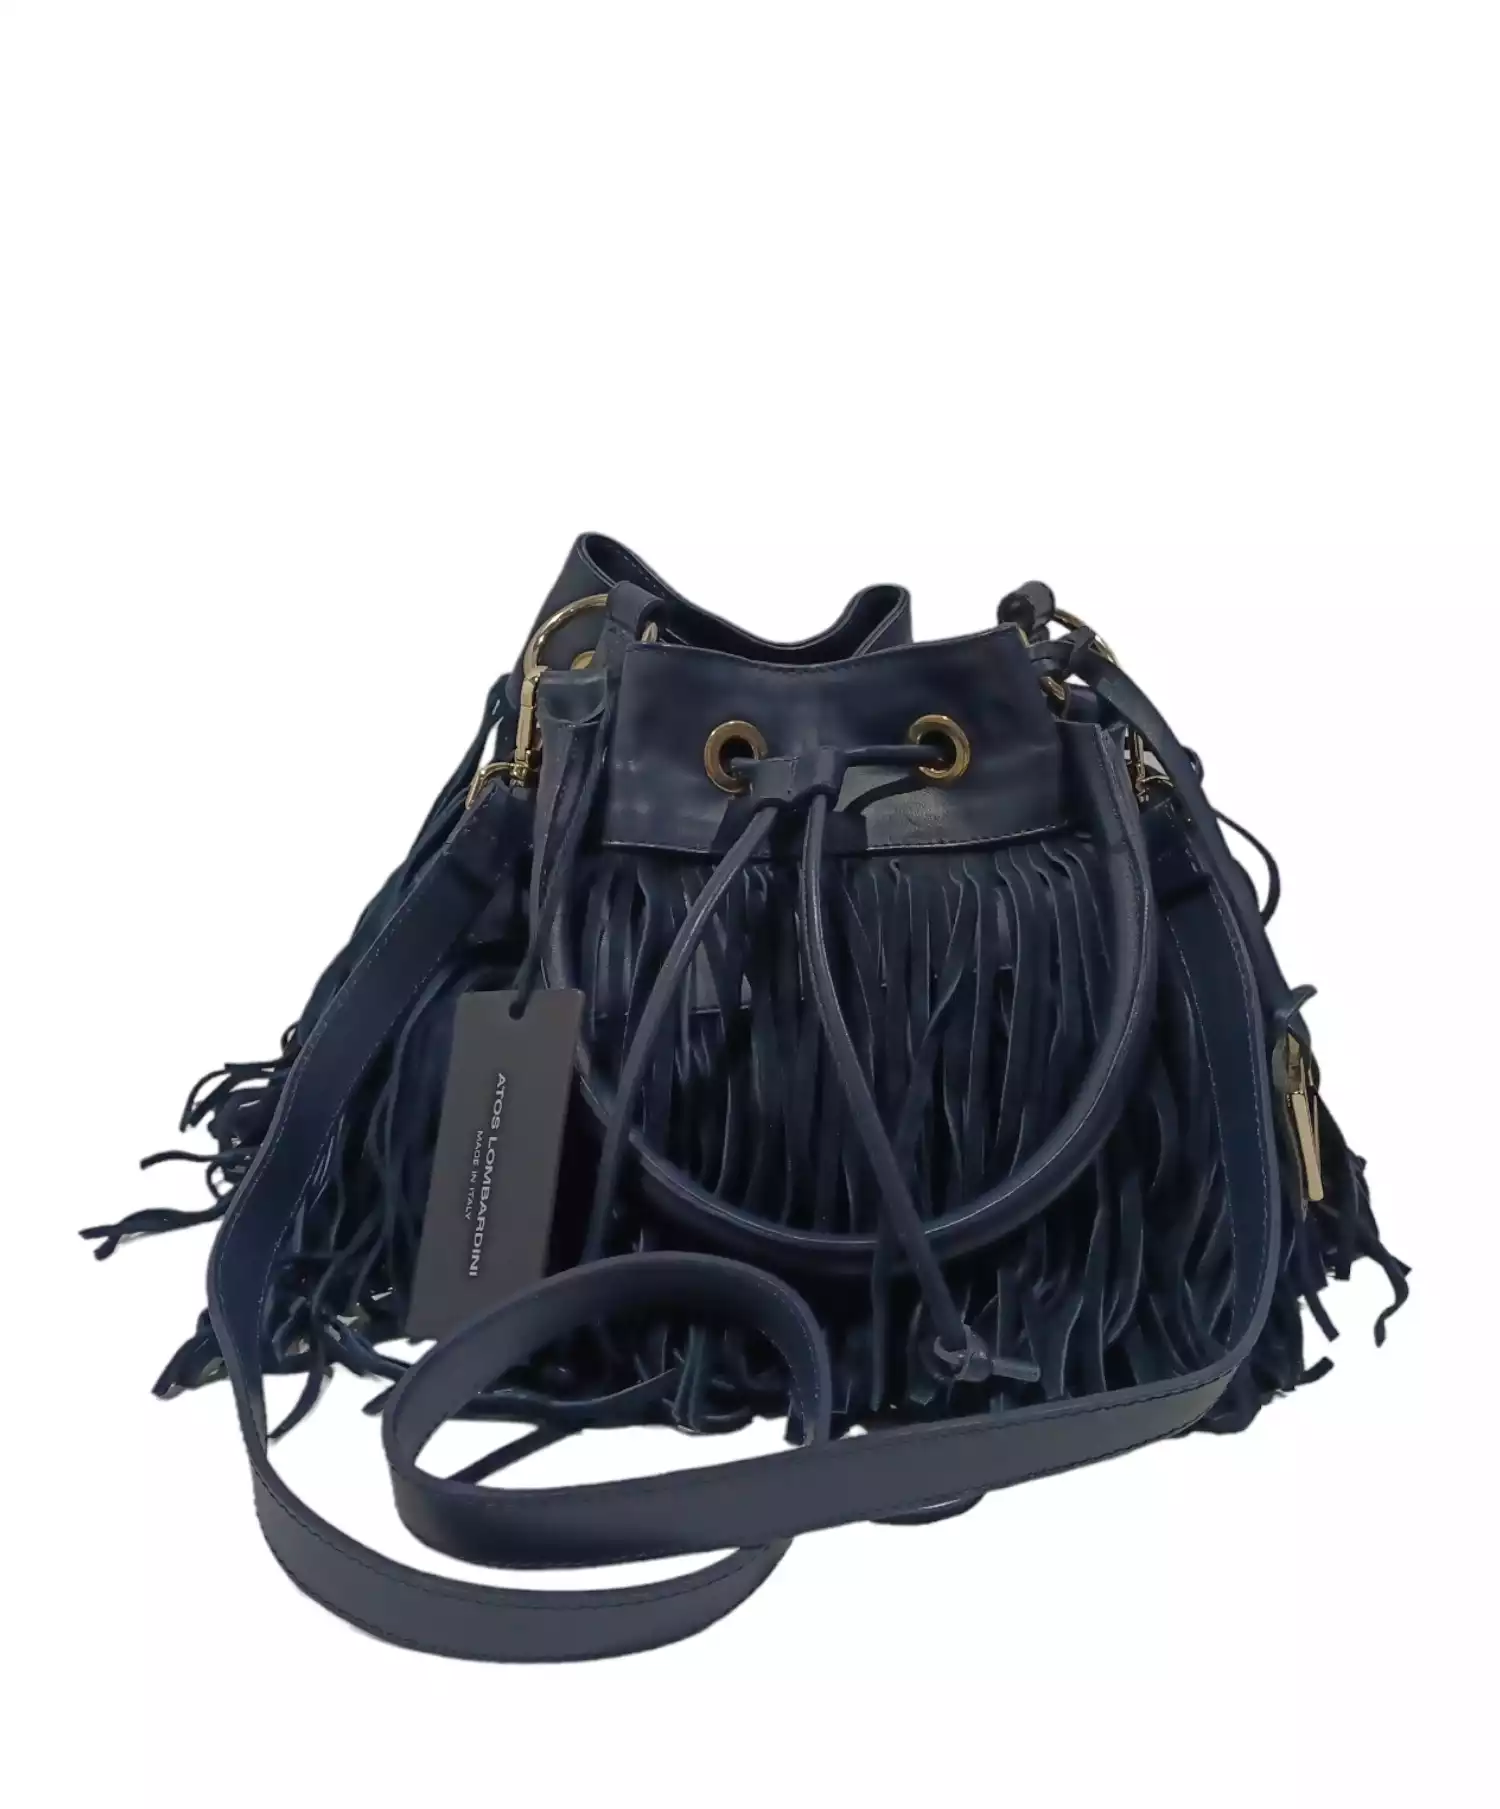 Sling Bag by Atos Lombardini